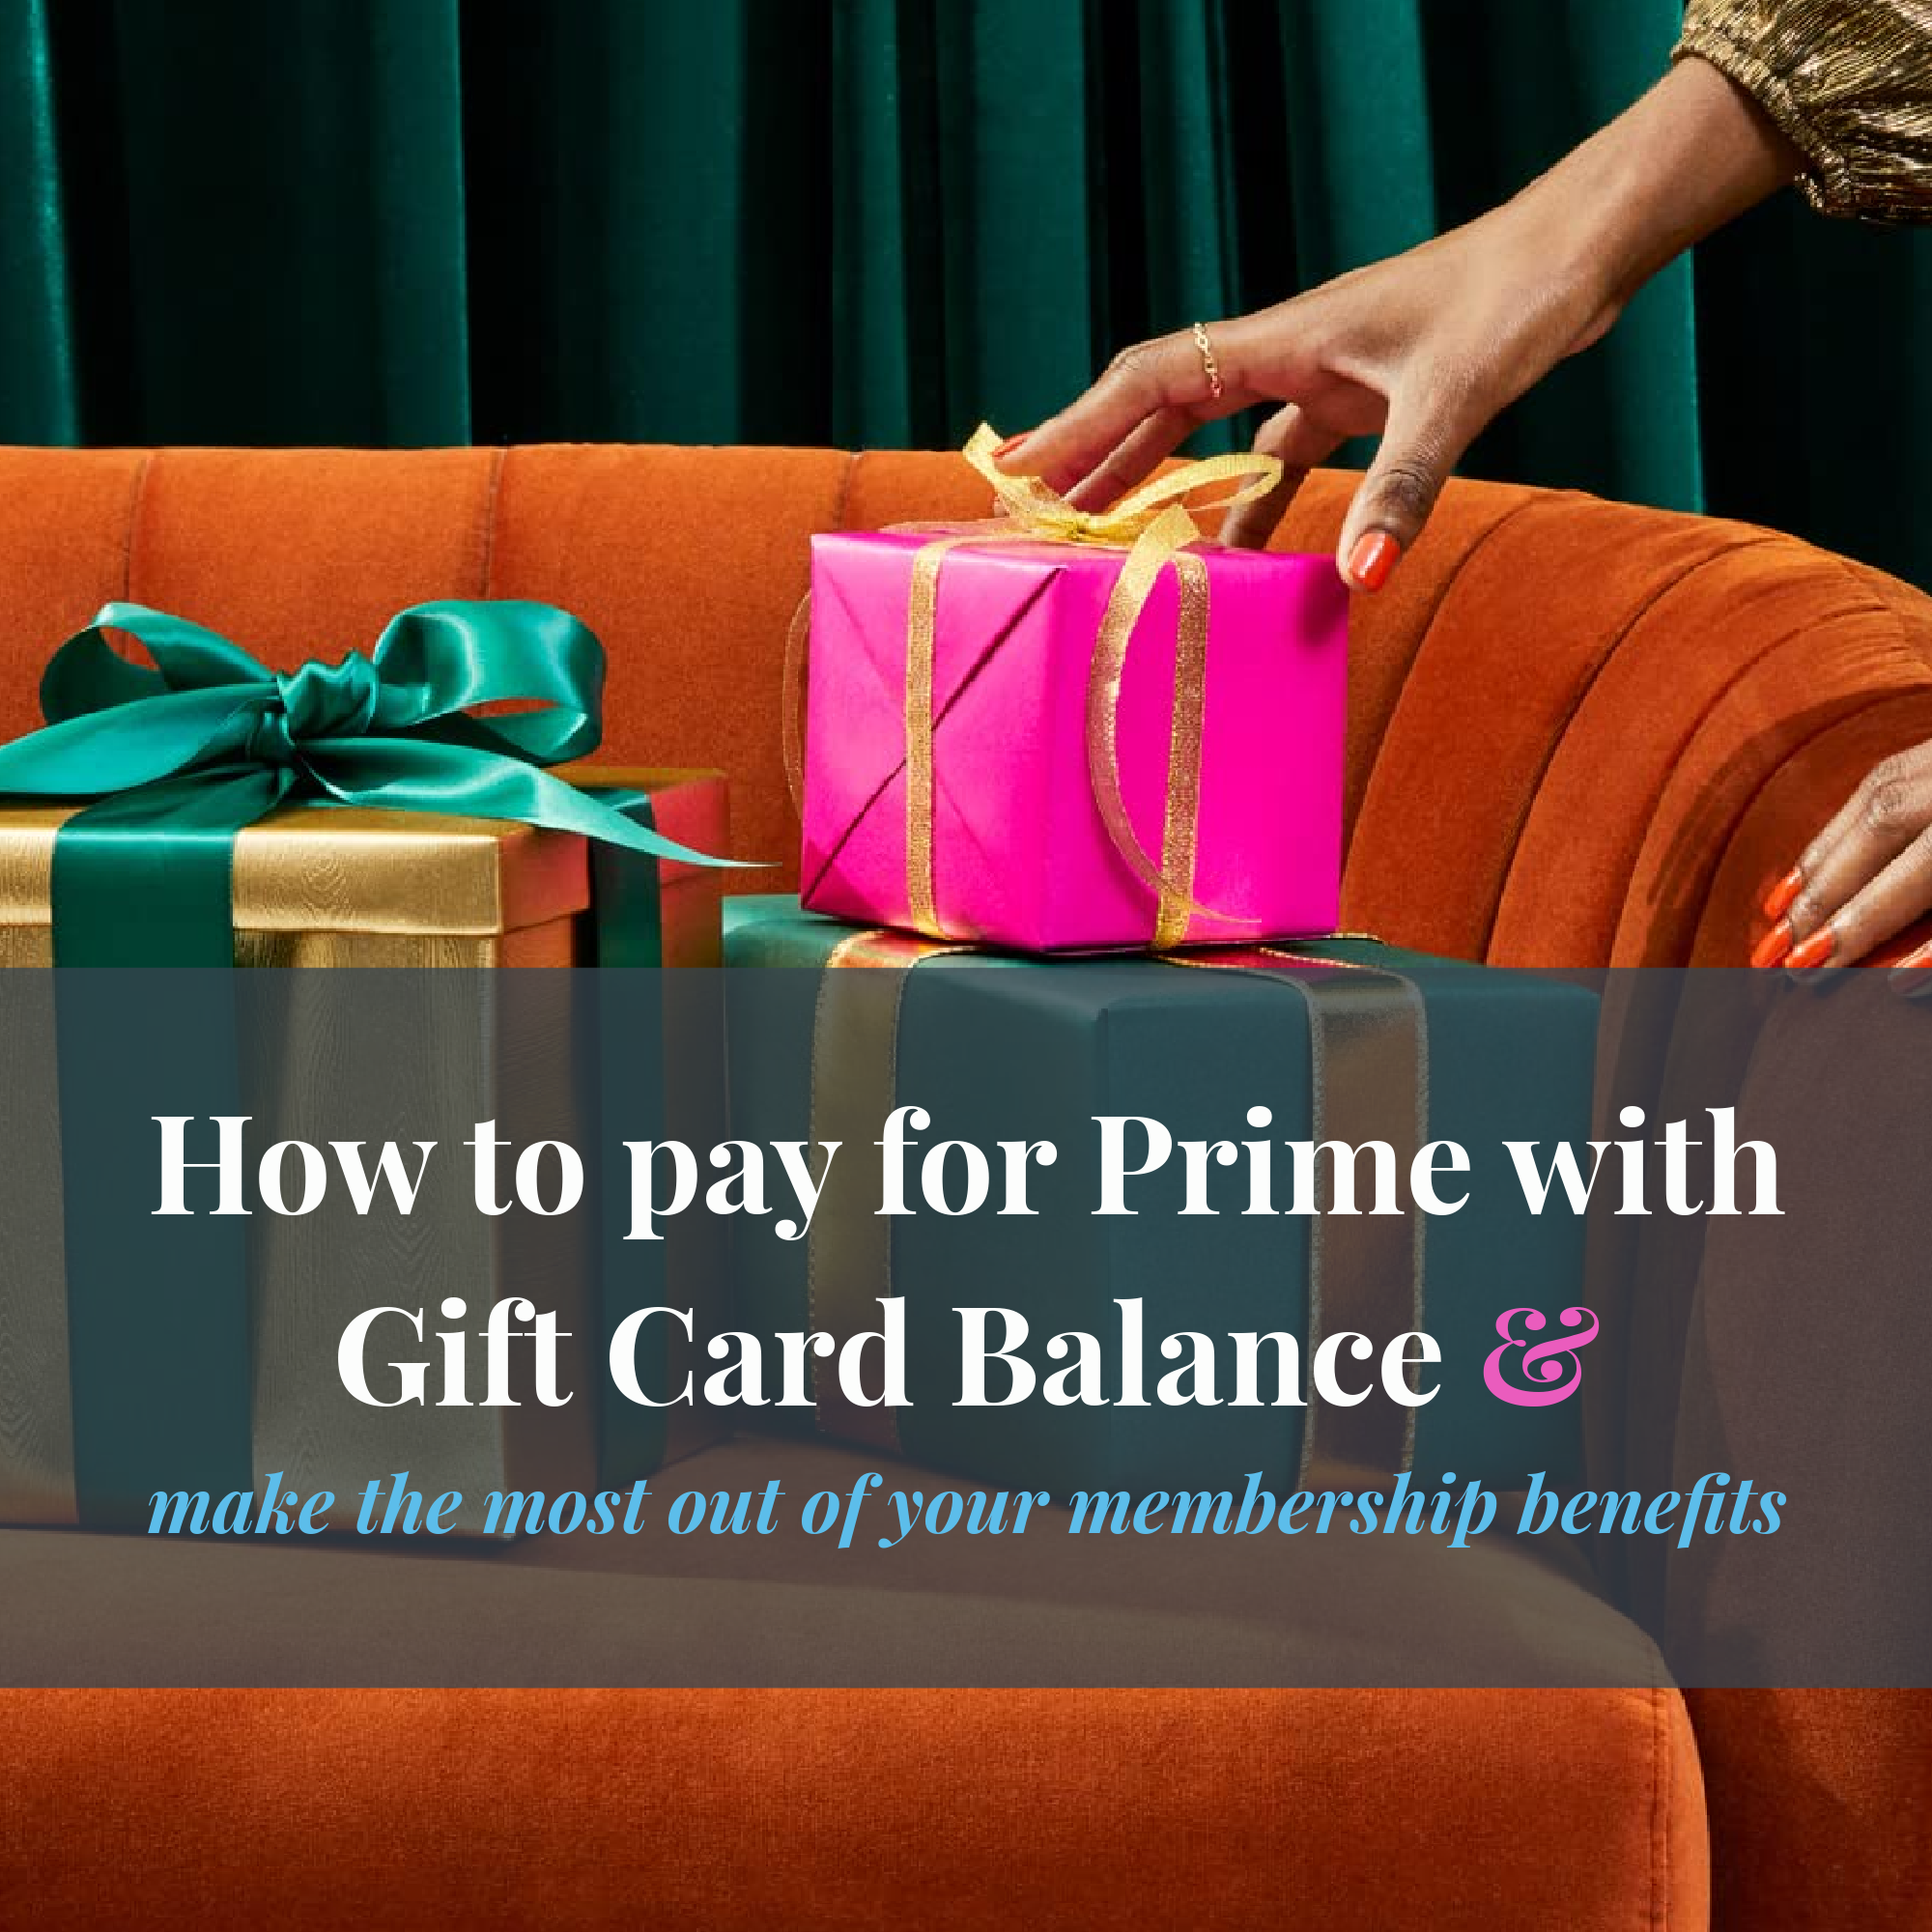 How to pay for Prime with Gift Card Balance and make the most out of your  membership benefits